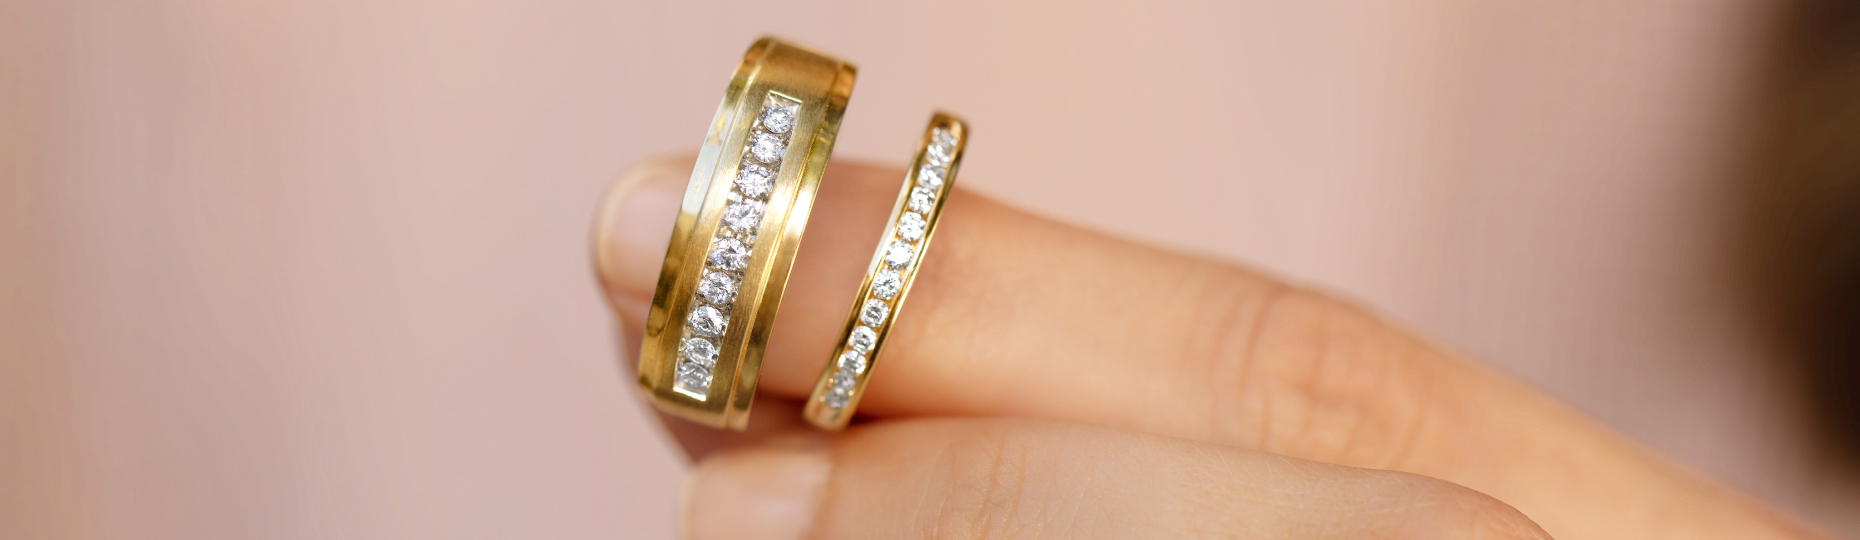 Buy Couple Rings Online  Couple Diamond & Gold Rings Designs